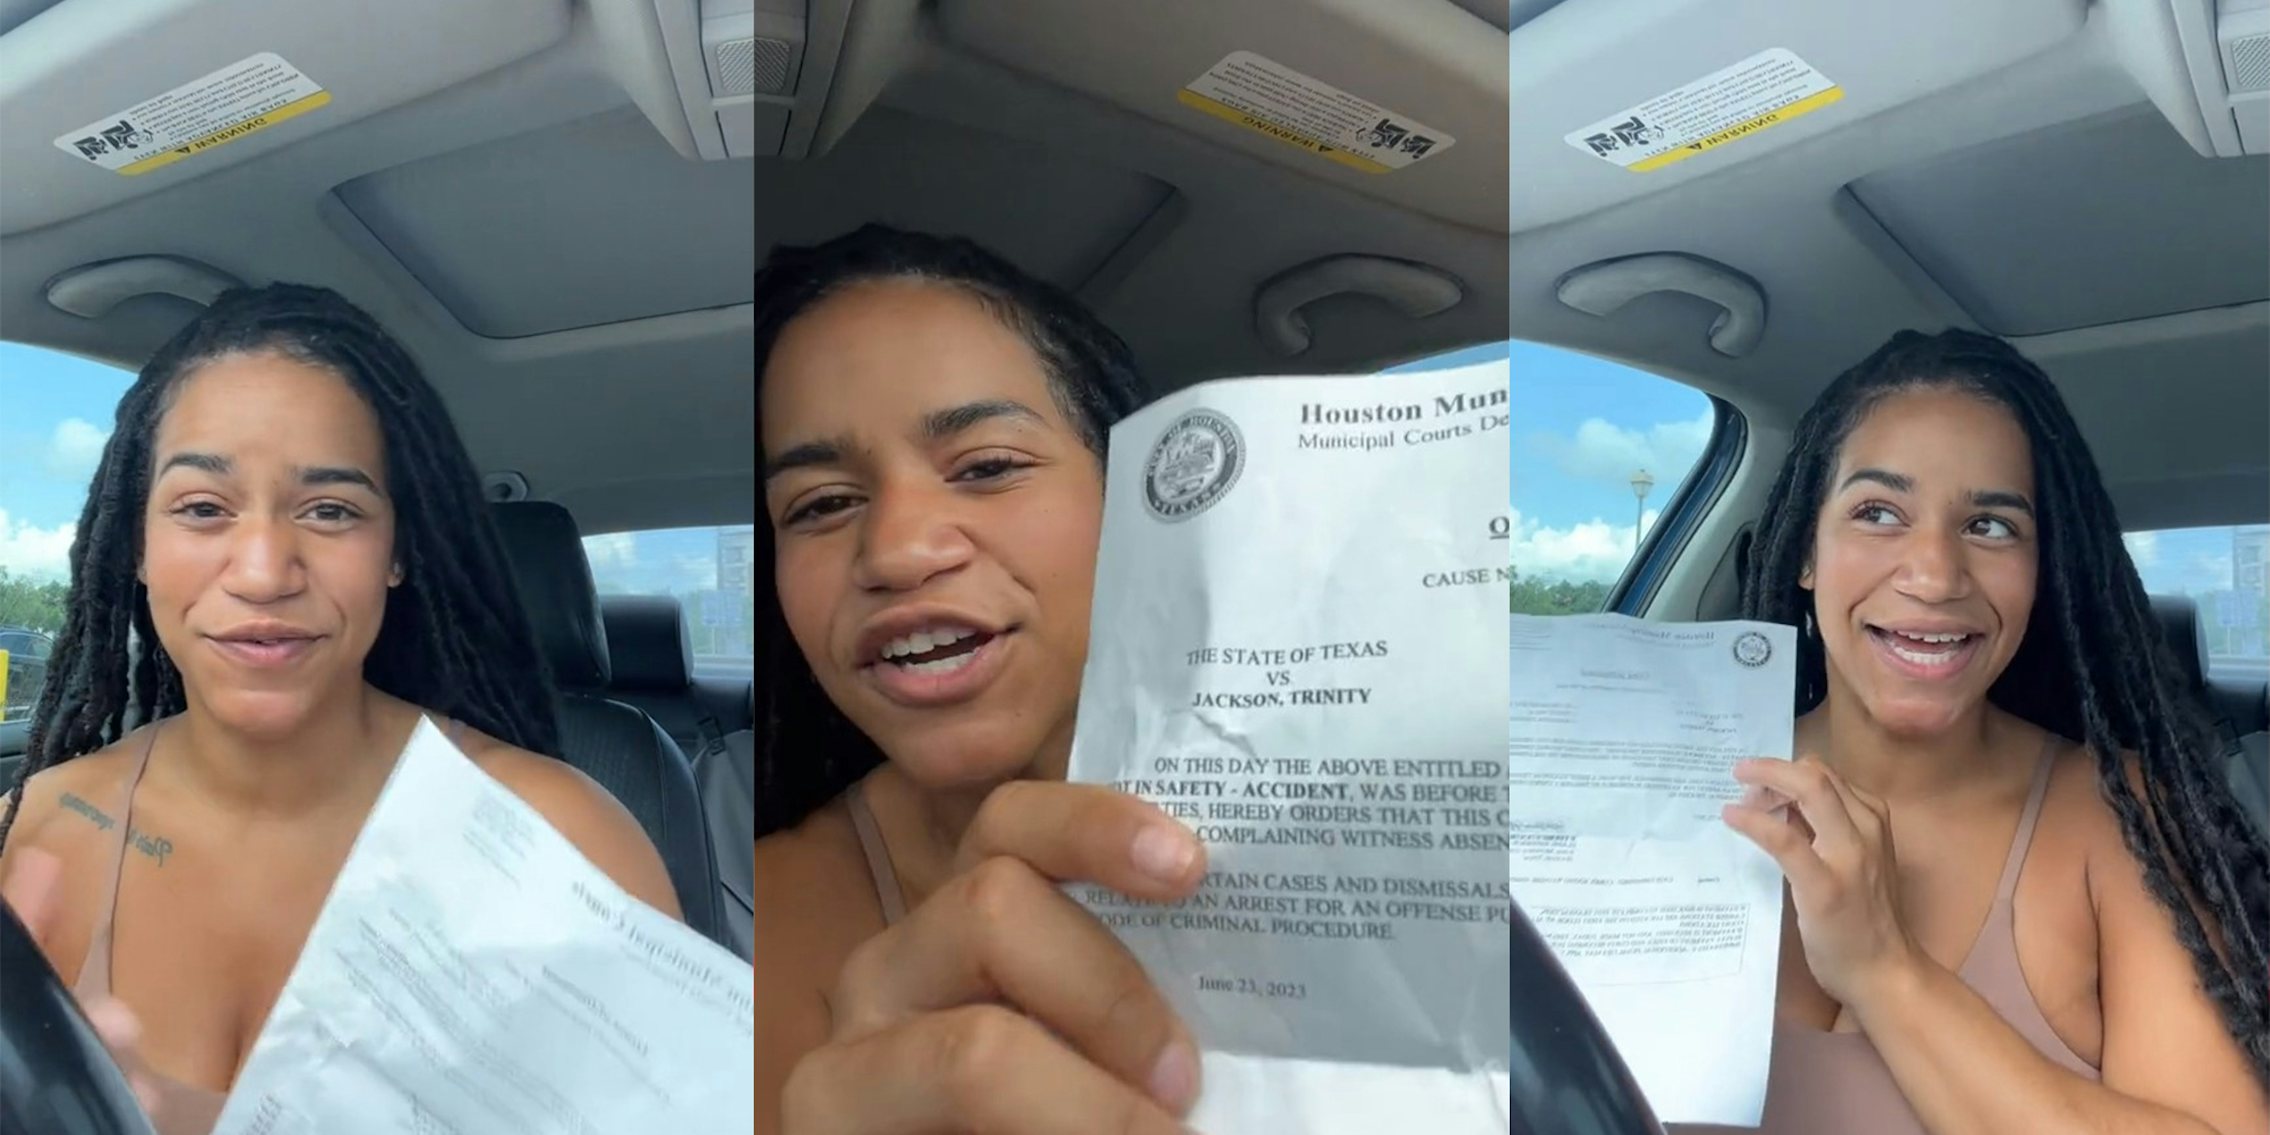 Driver gets out of paying $300 ticket by choosing to go to court